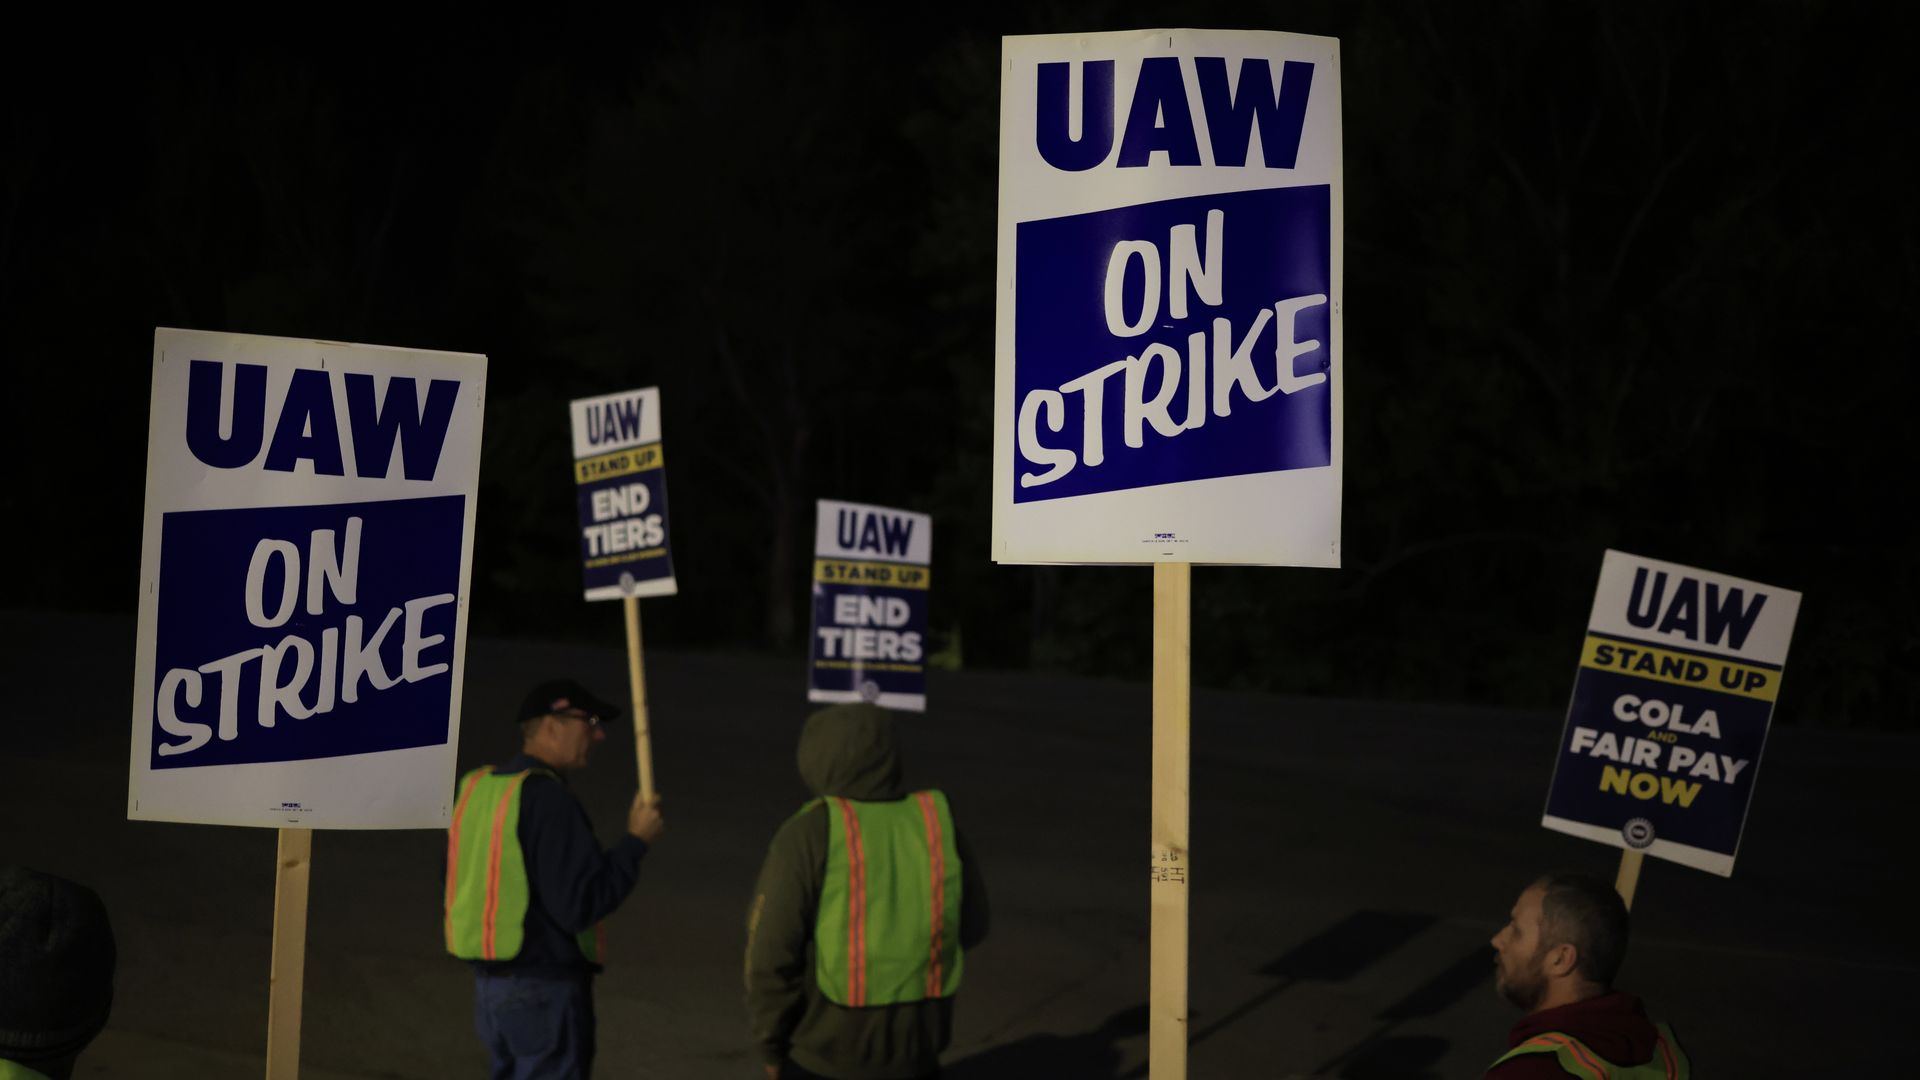 Workers holding picket signs at night